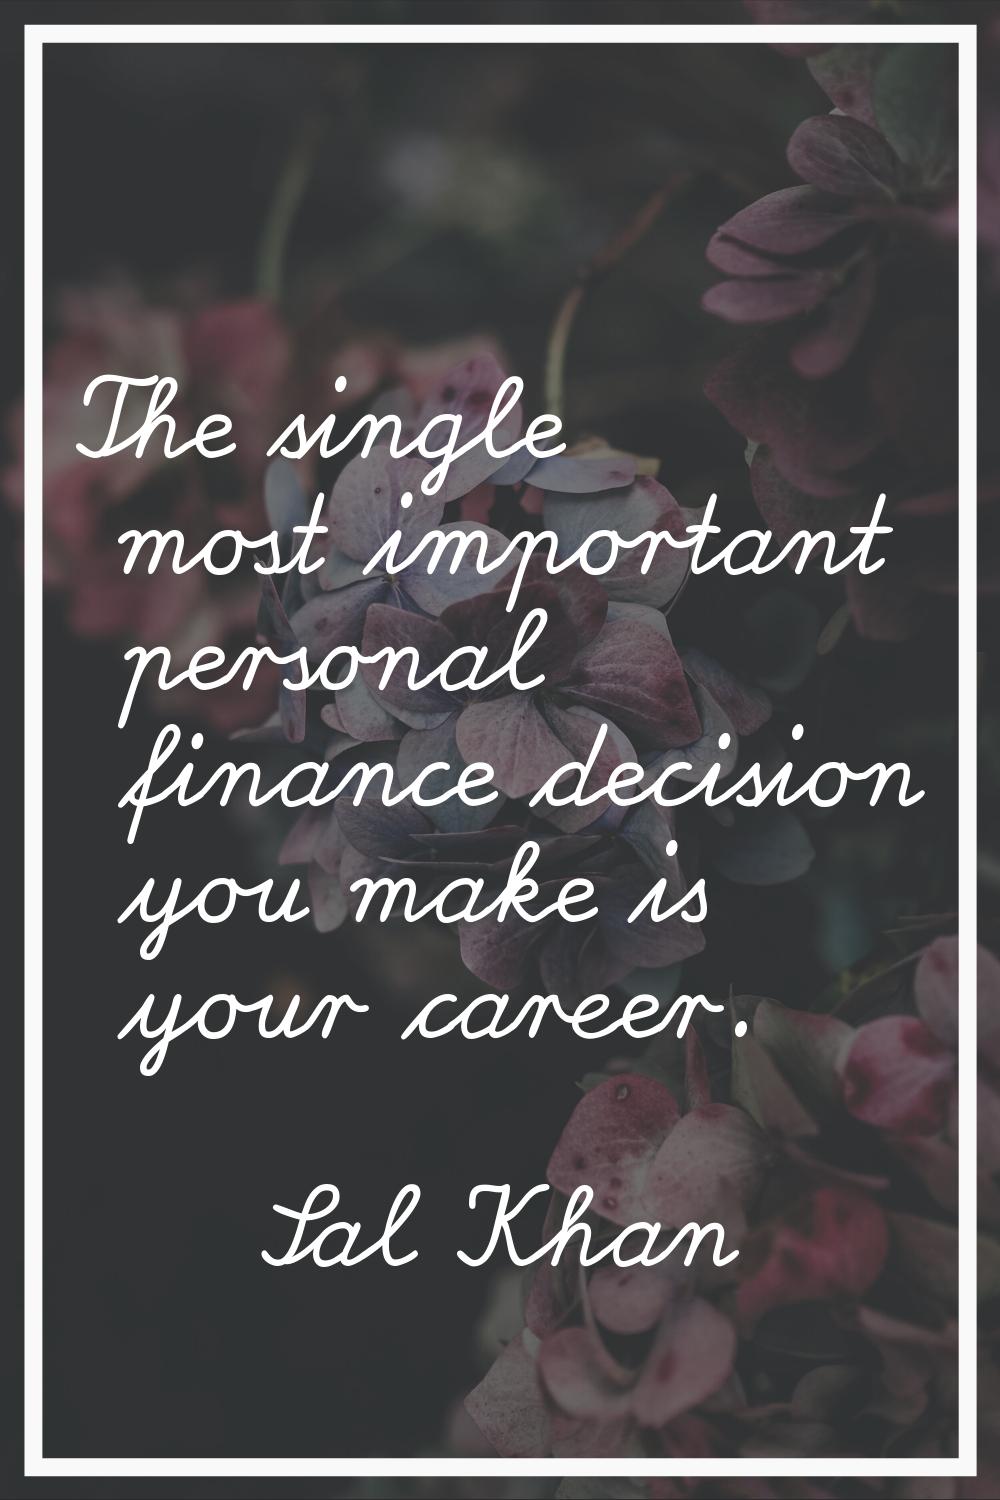 The single most important personal finance decision you make is your career.